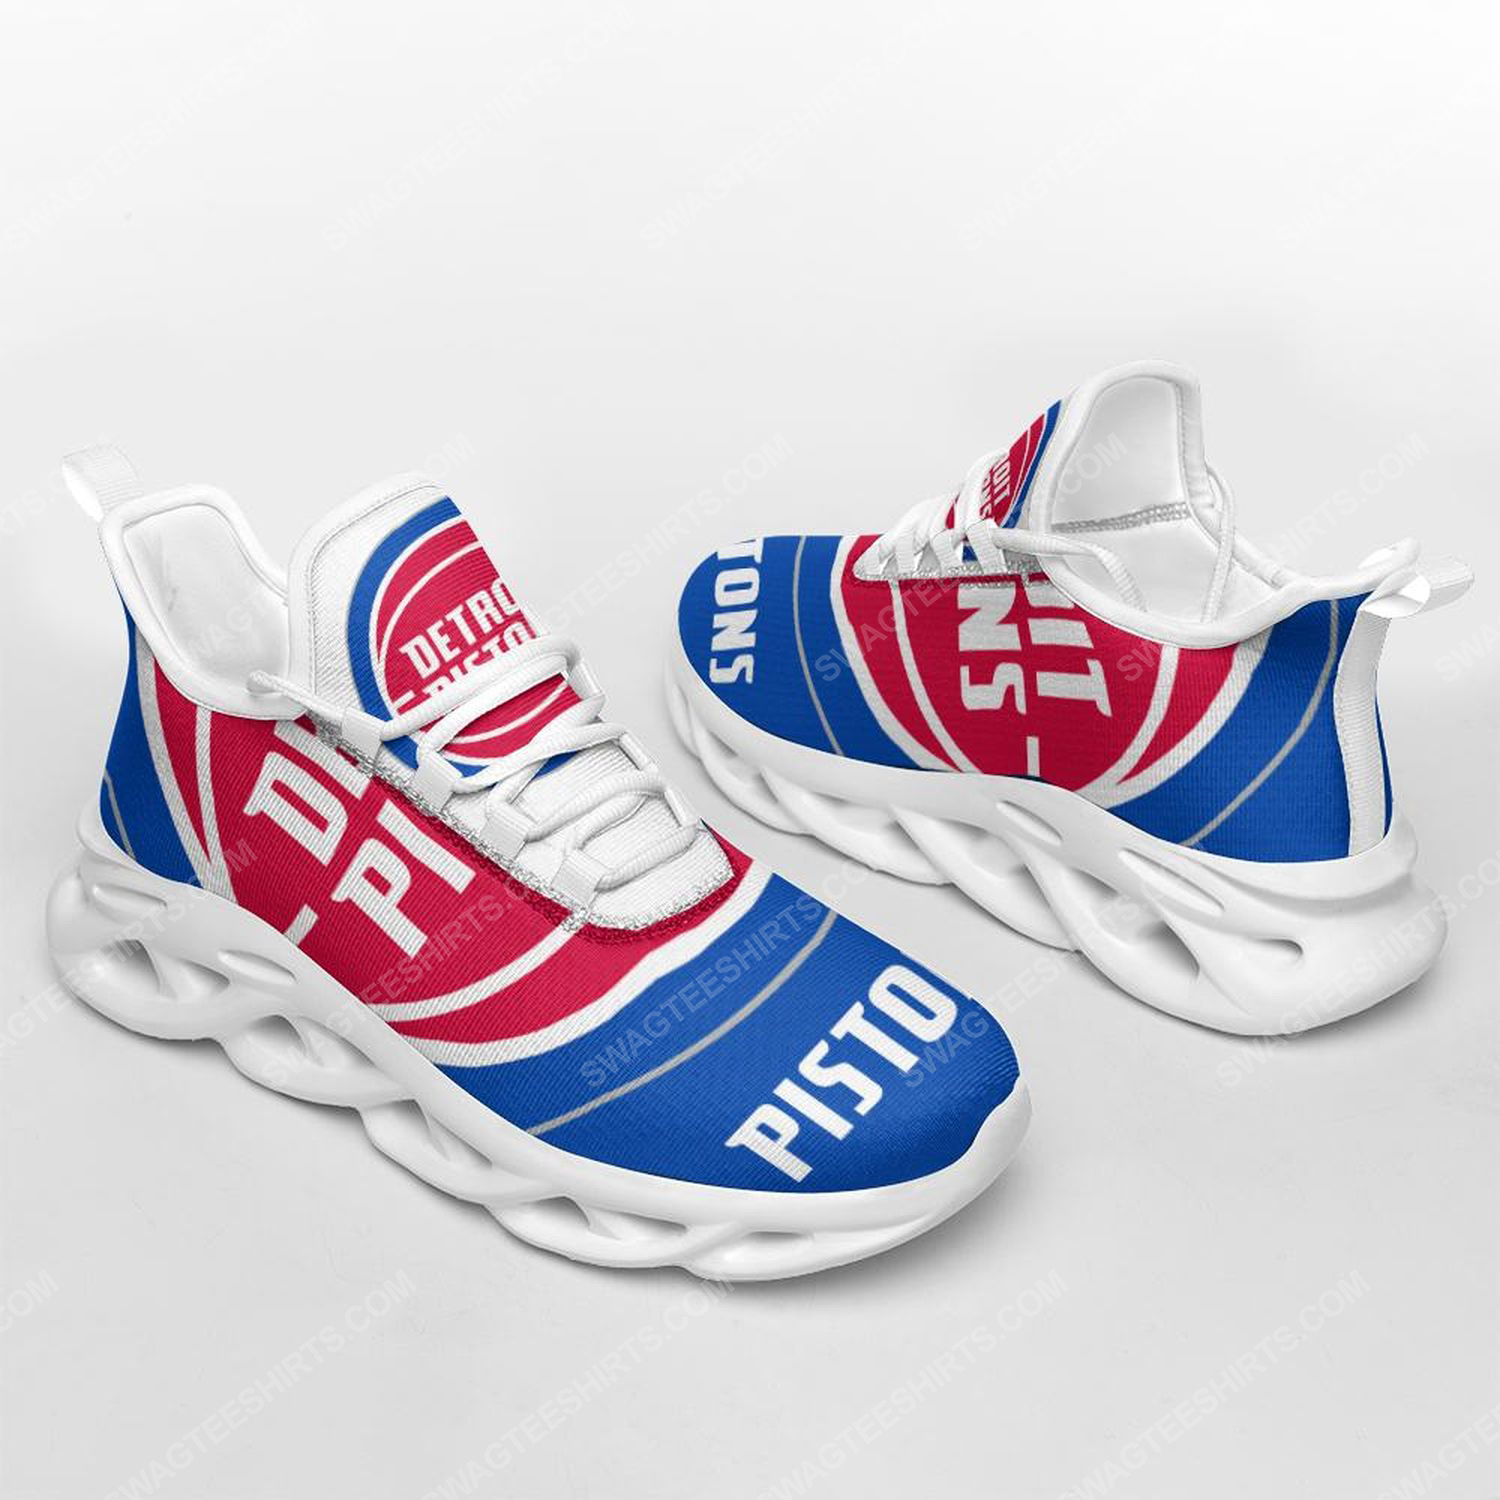 The detroit pistons basketball team max soul shoes 1